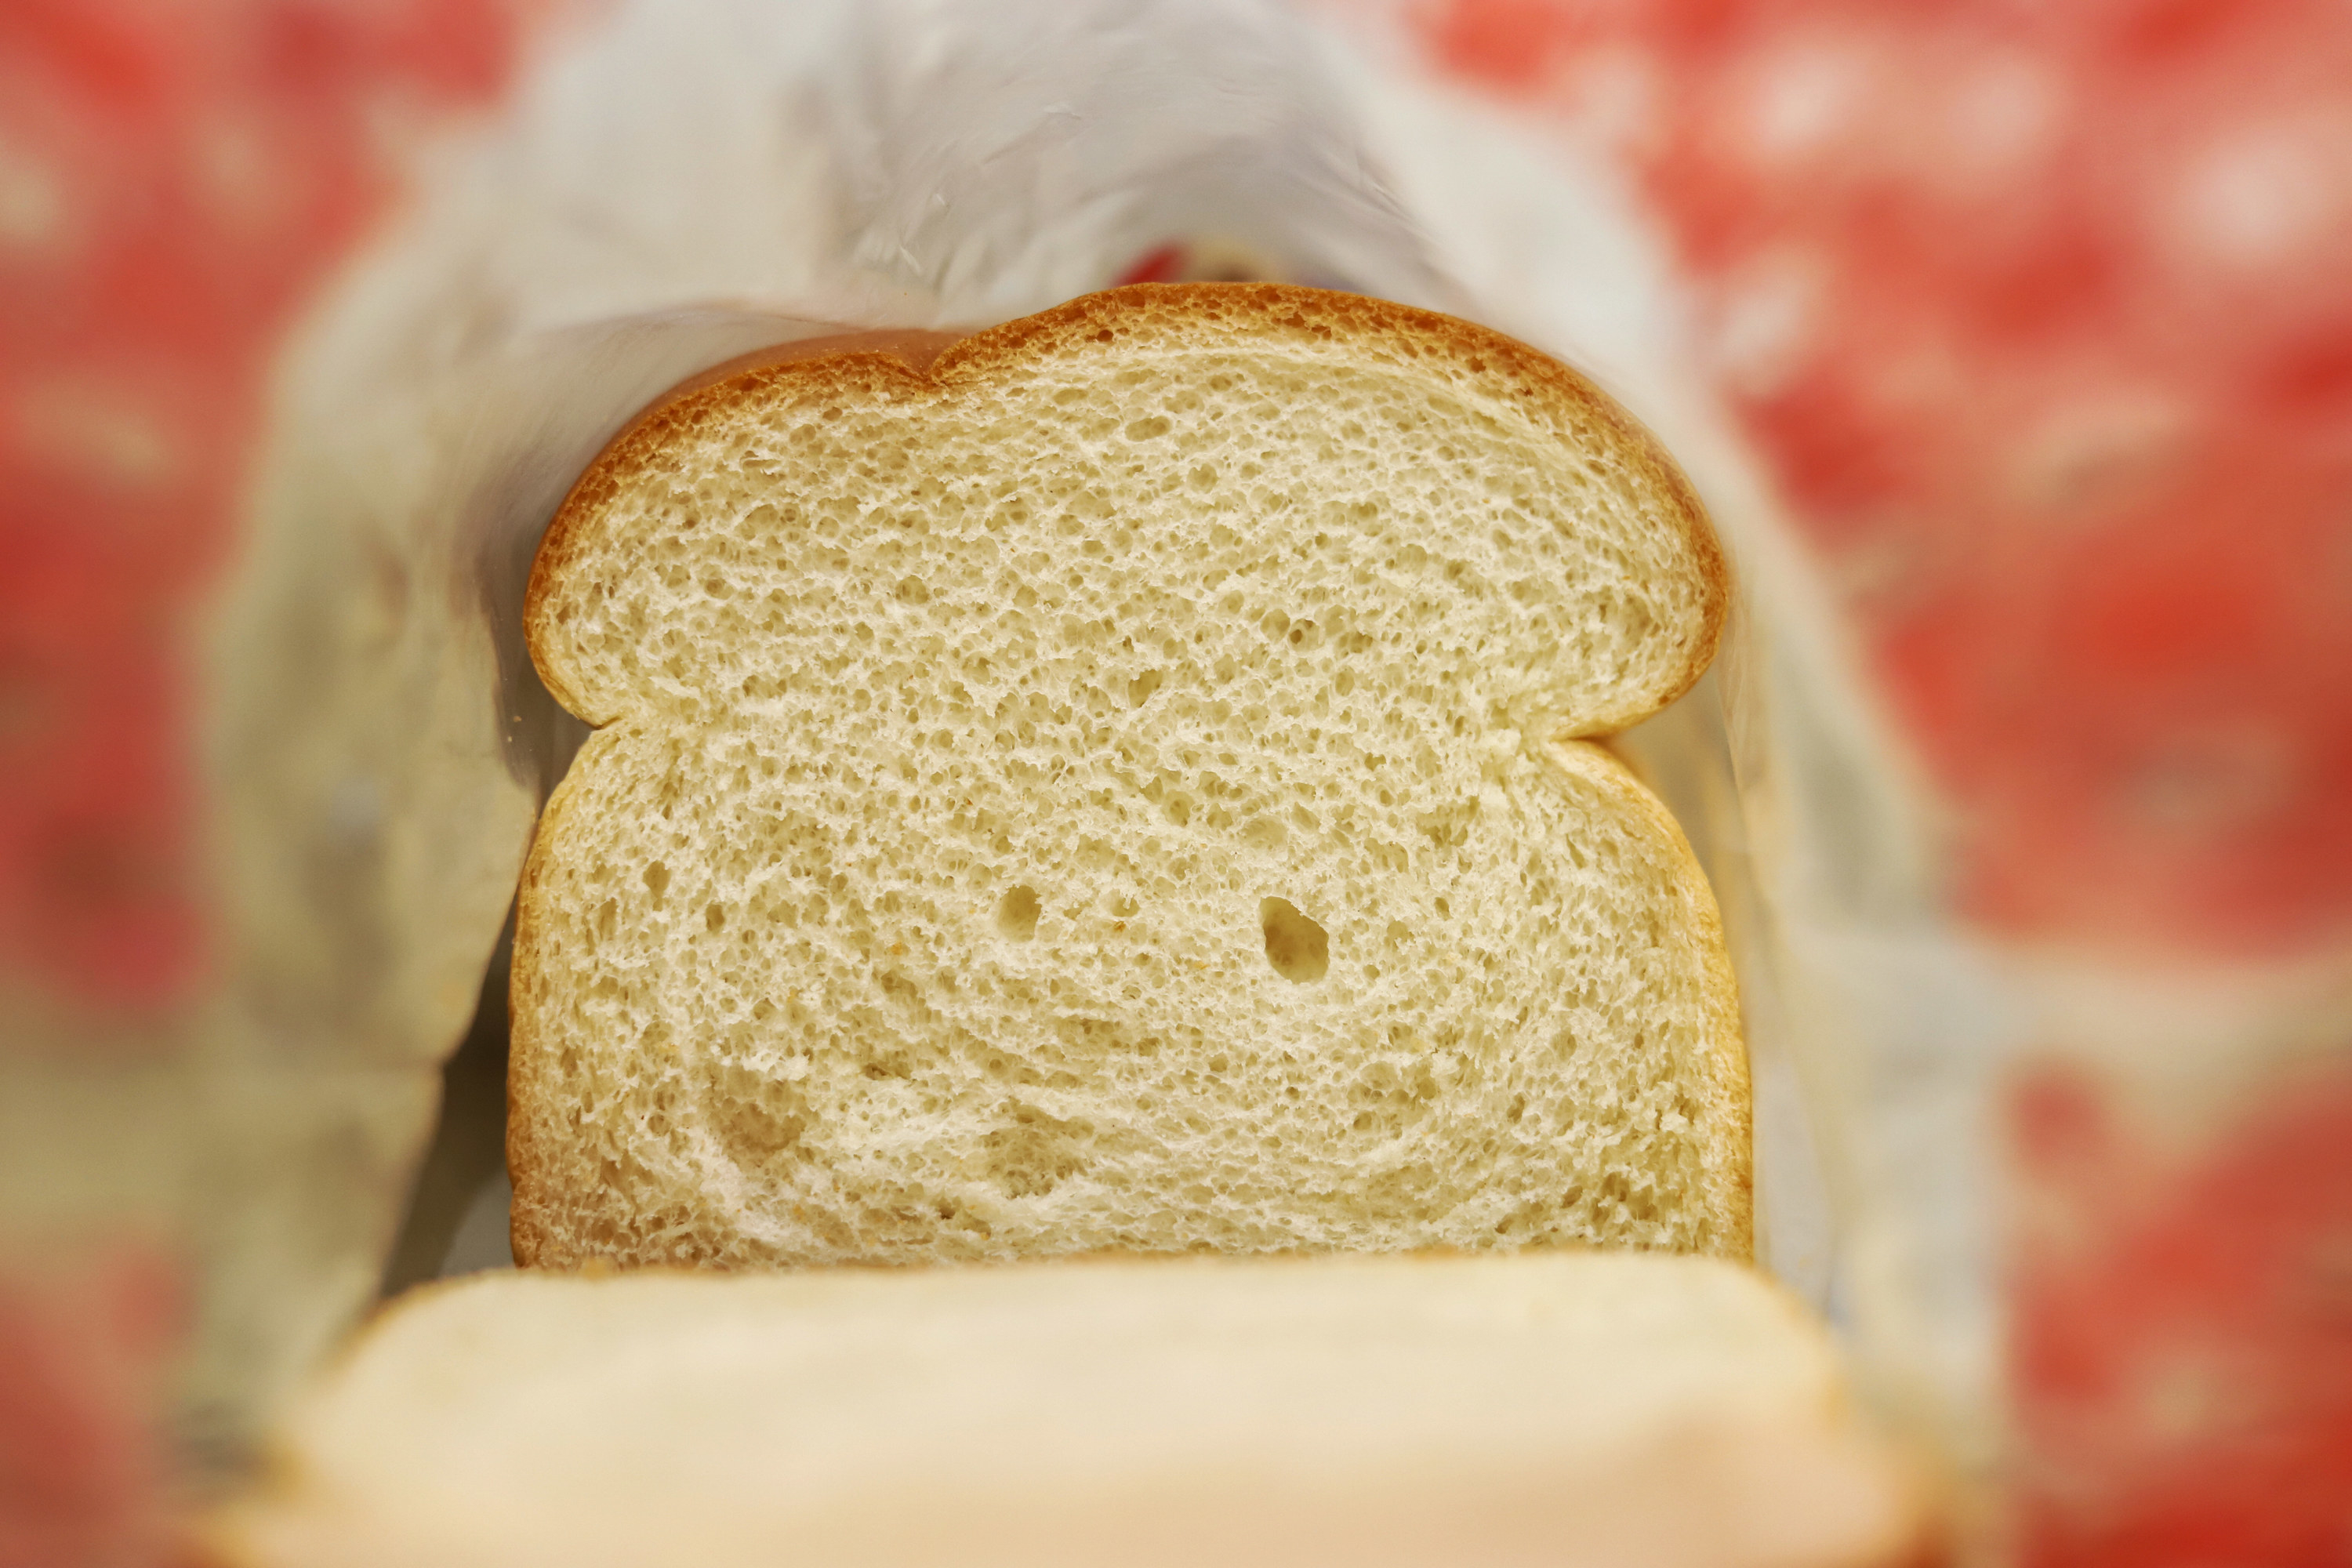 A close-up of a slice of white bread in a bag